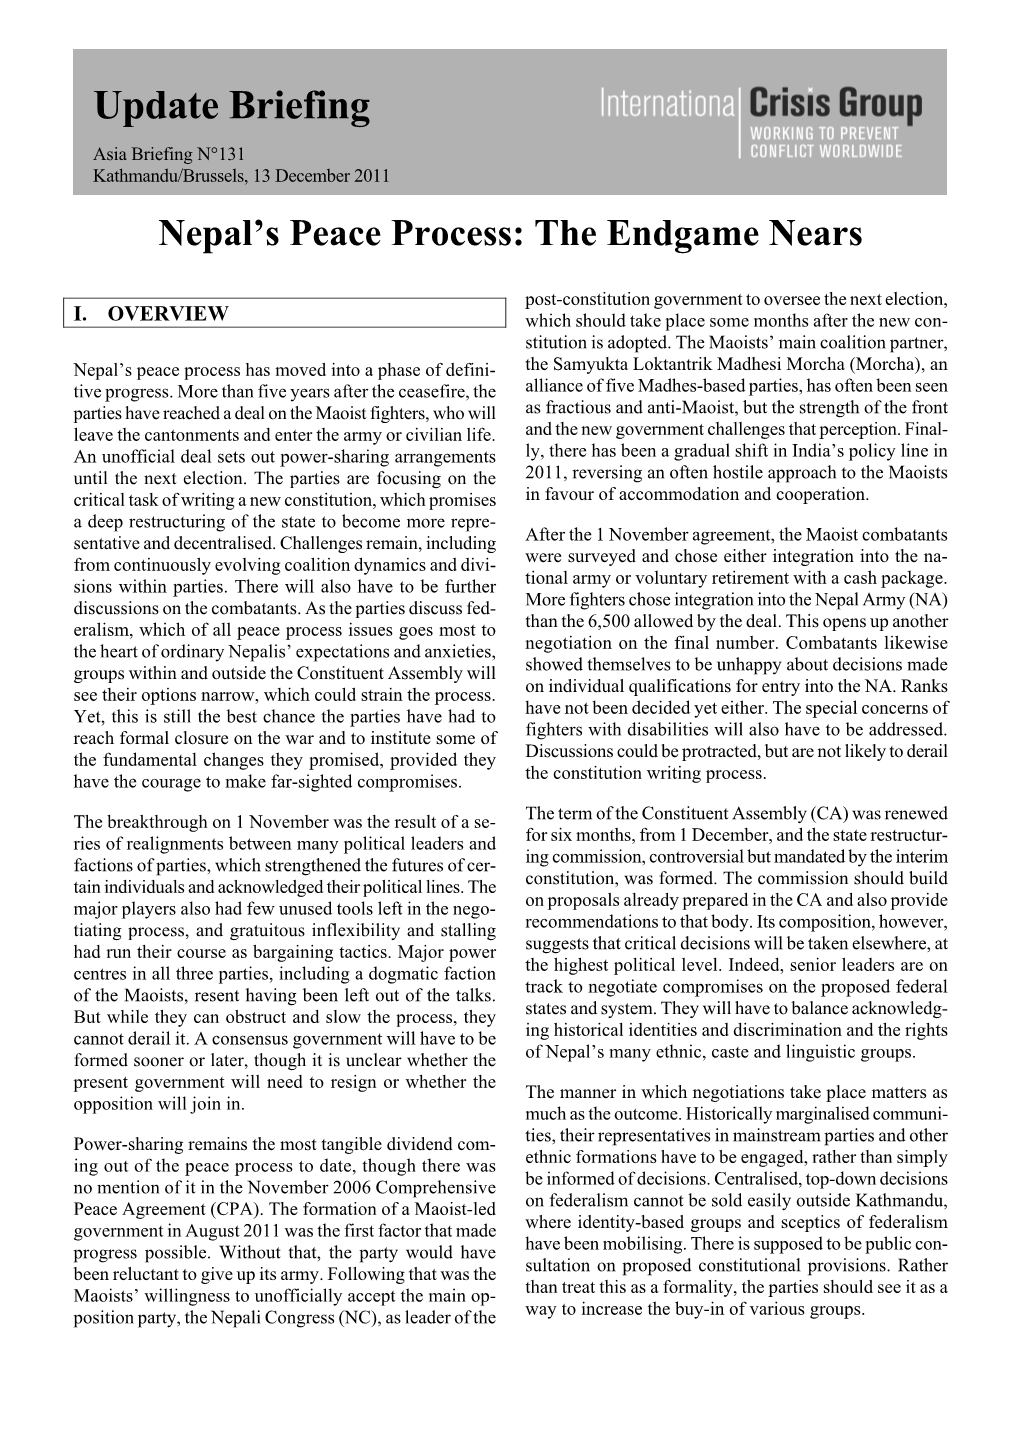 Nepal's Peace Process: the Endgame Years